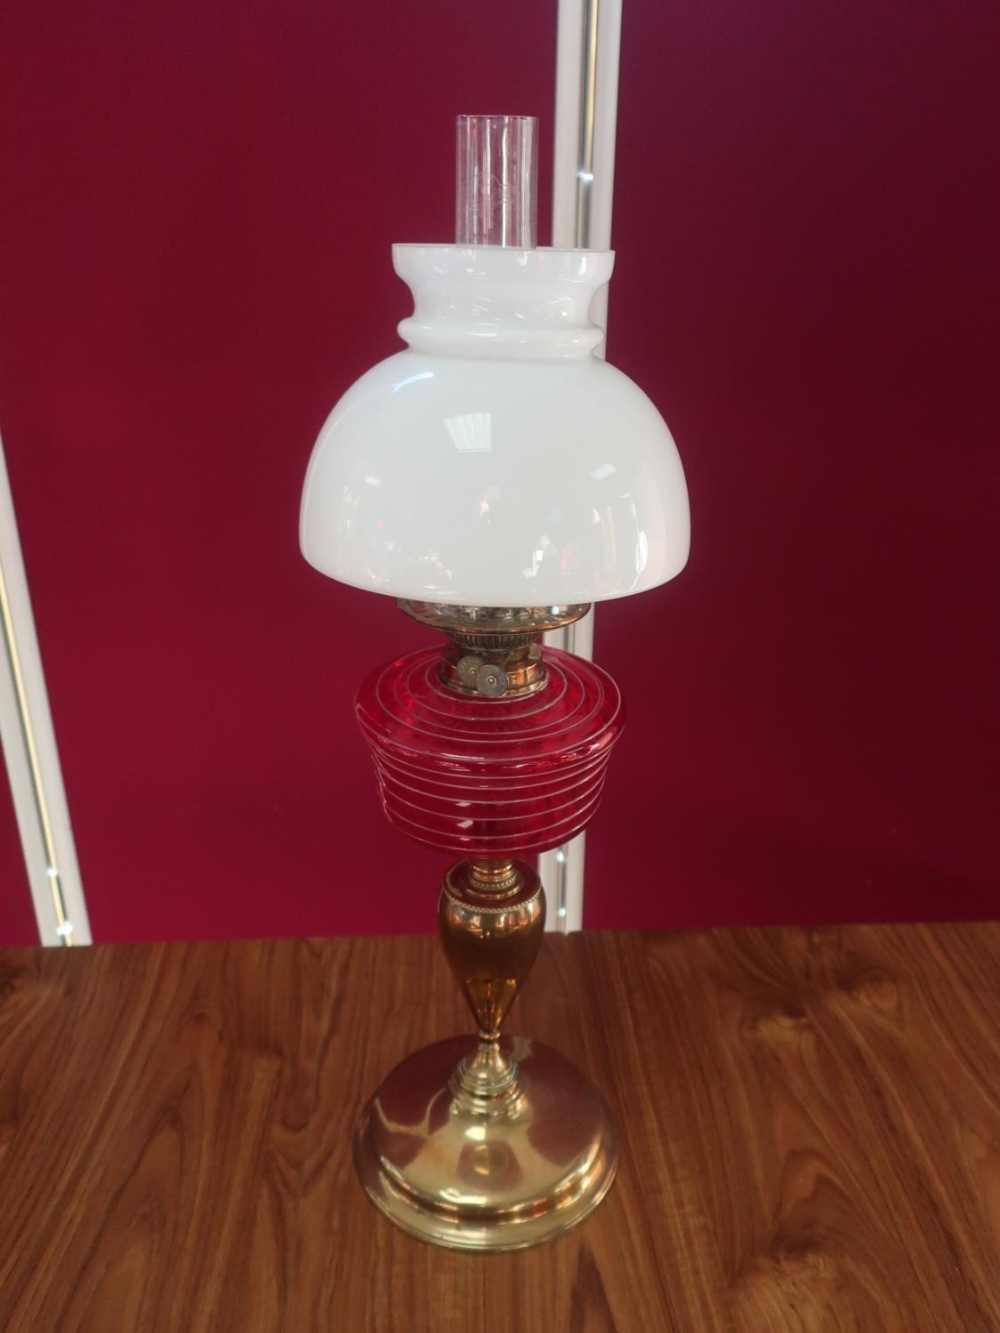 Early 20th C brass oil lamp, with red glass reservoir and clear glass shade, on urn shaped column